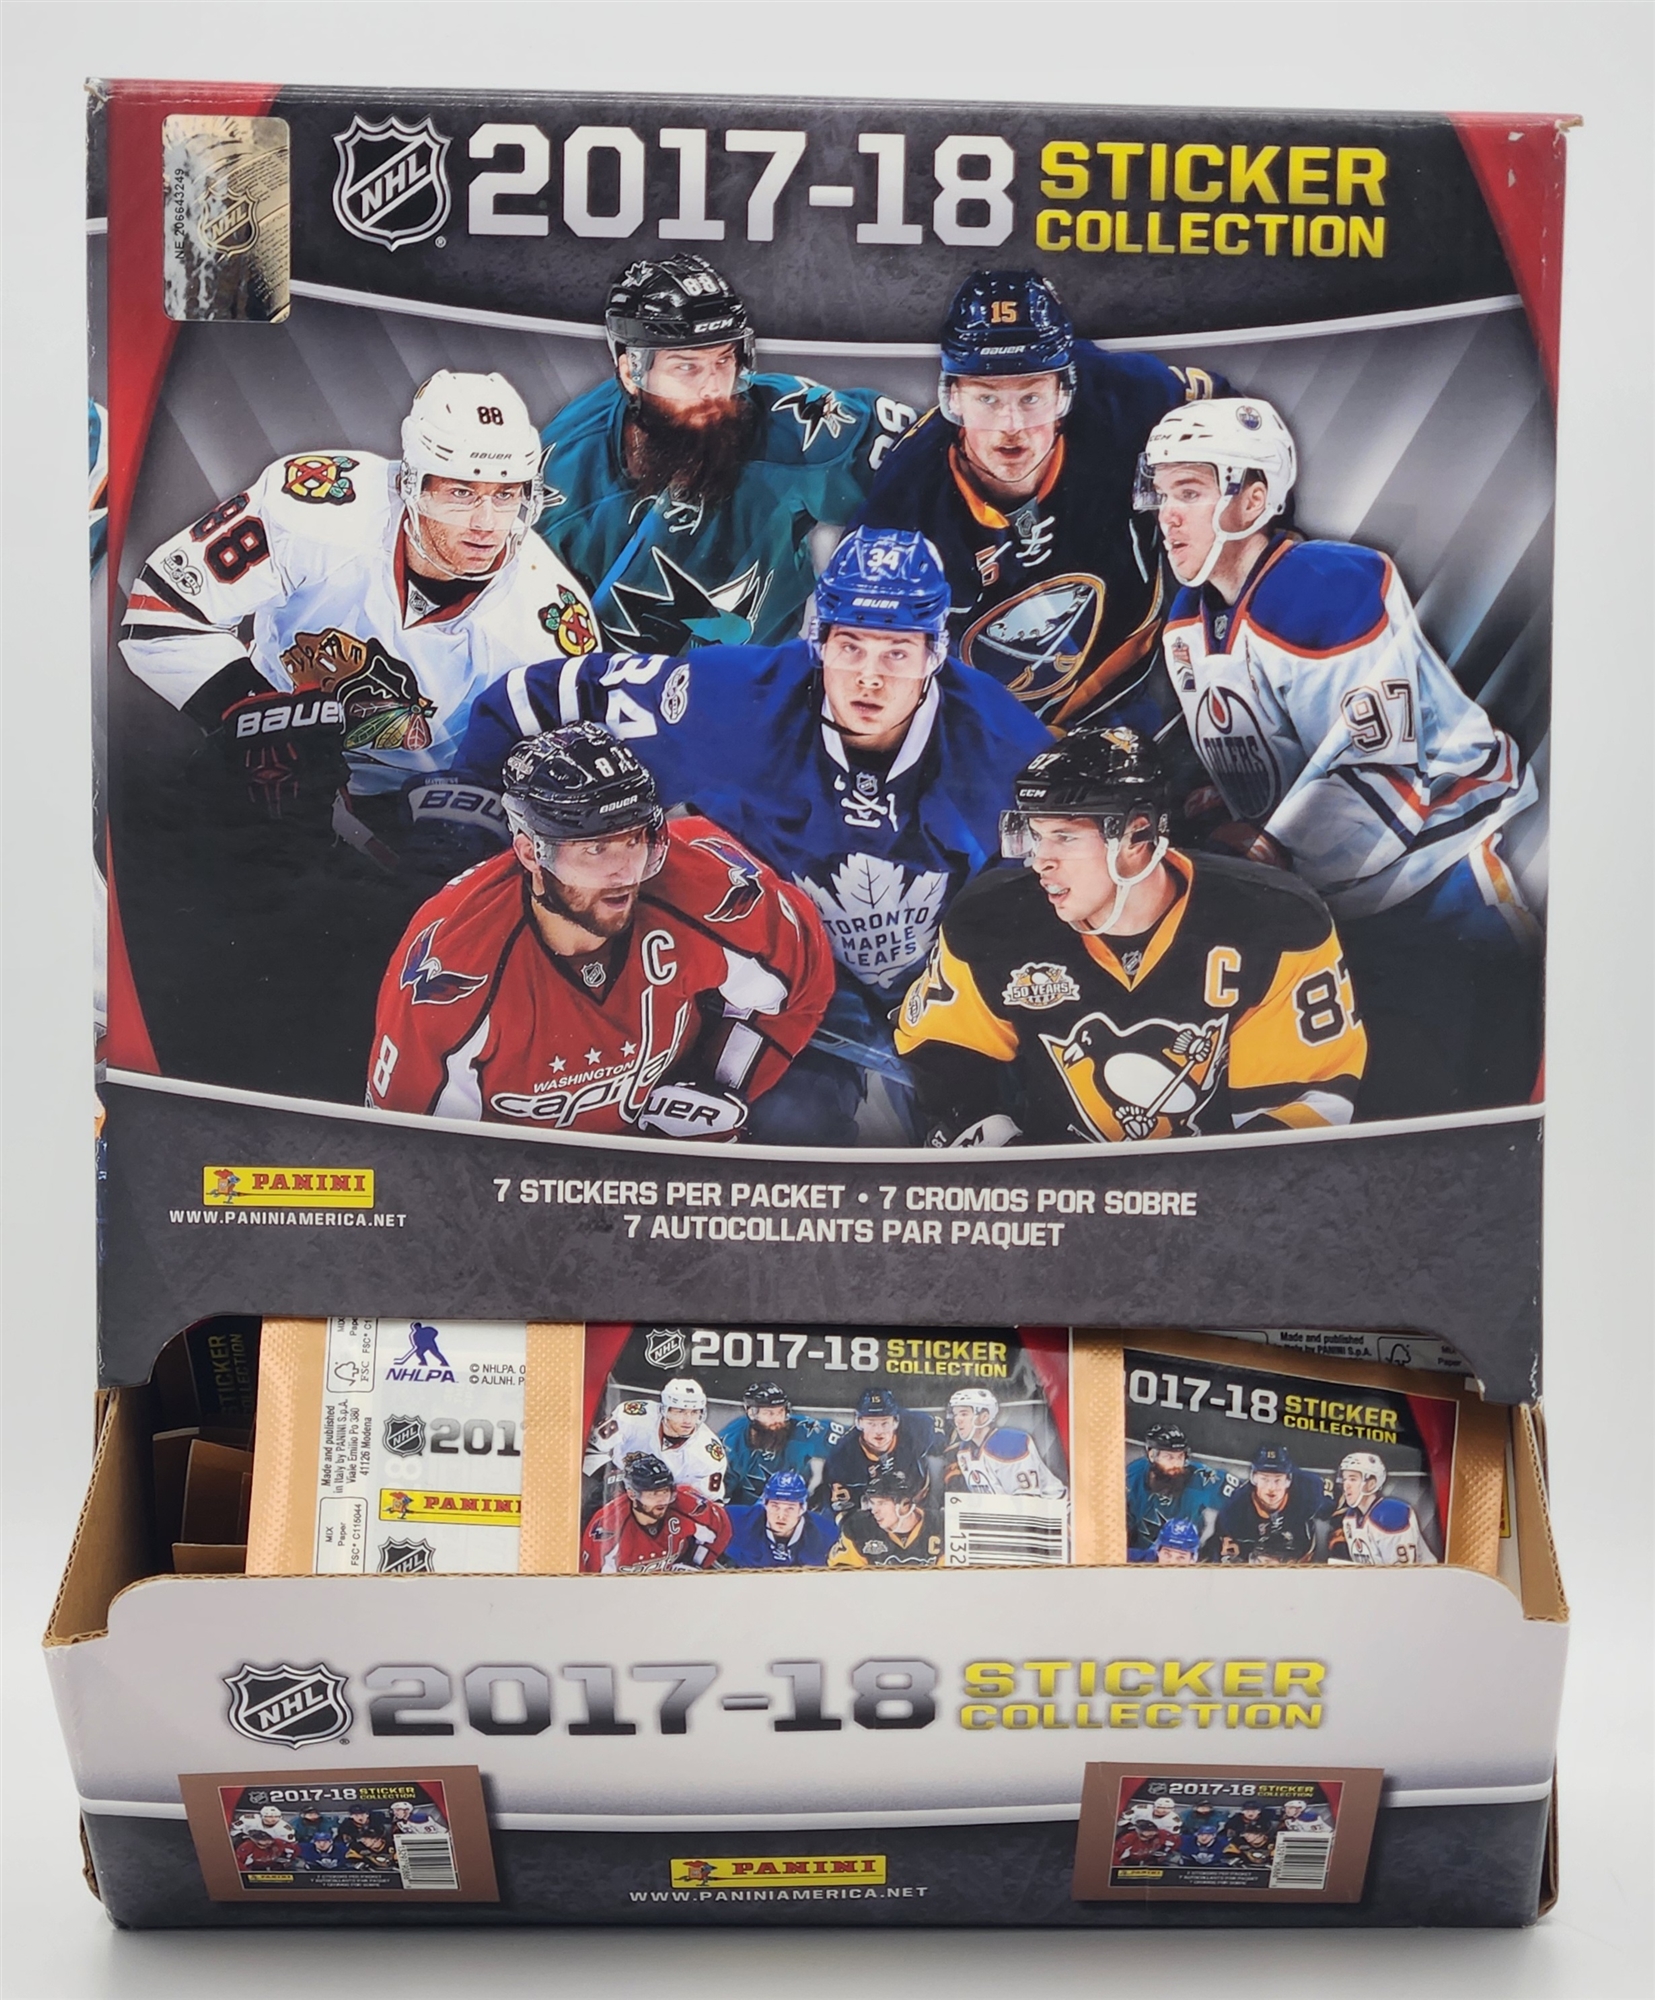 2017-18 Panini NHL Stickers Gravity Box with 141 Sealed Packs